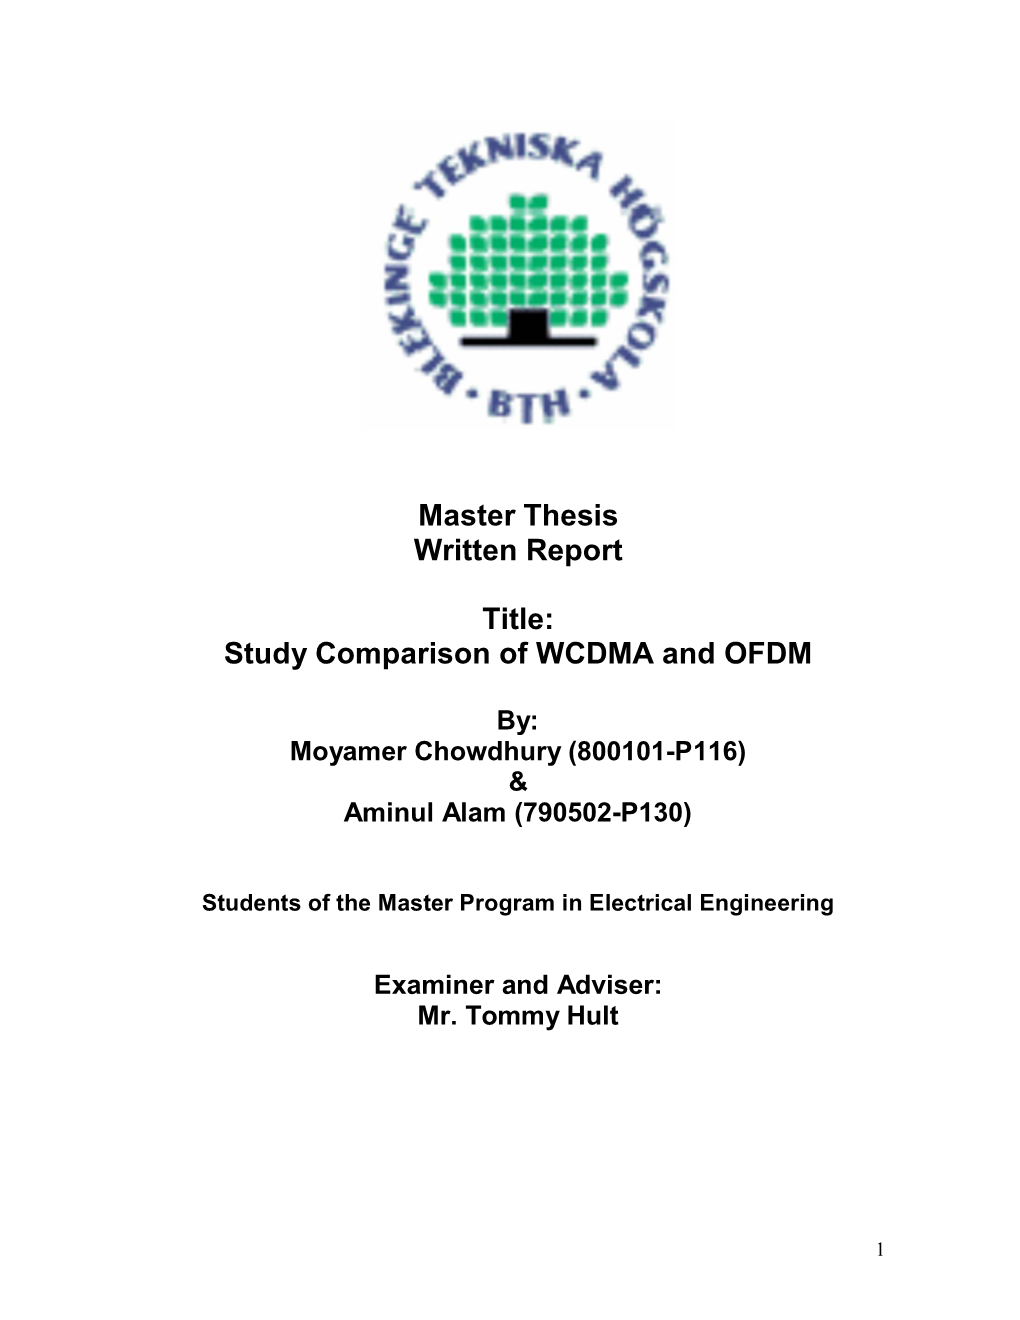 Study Comparison of WCDMA and OFDM